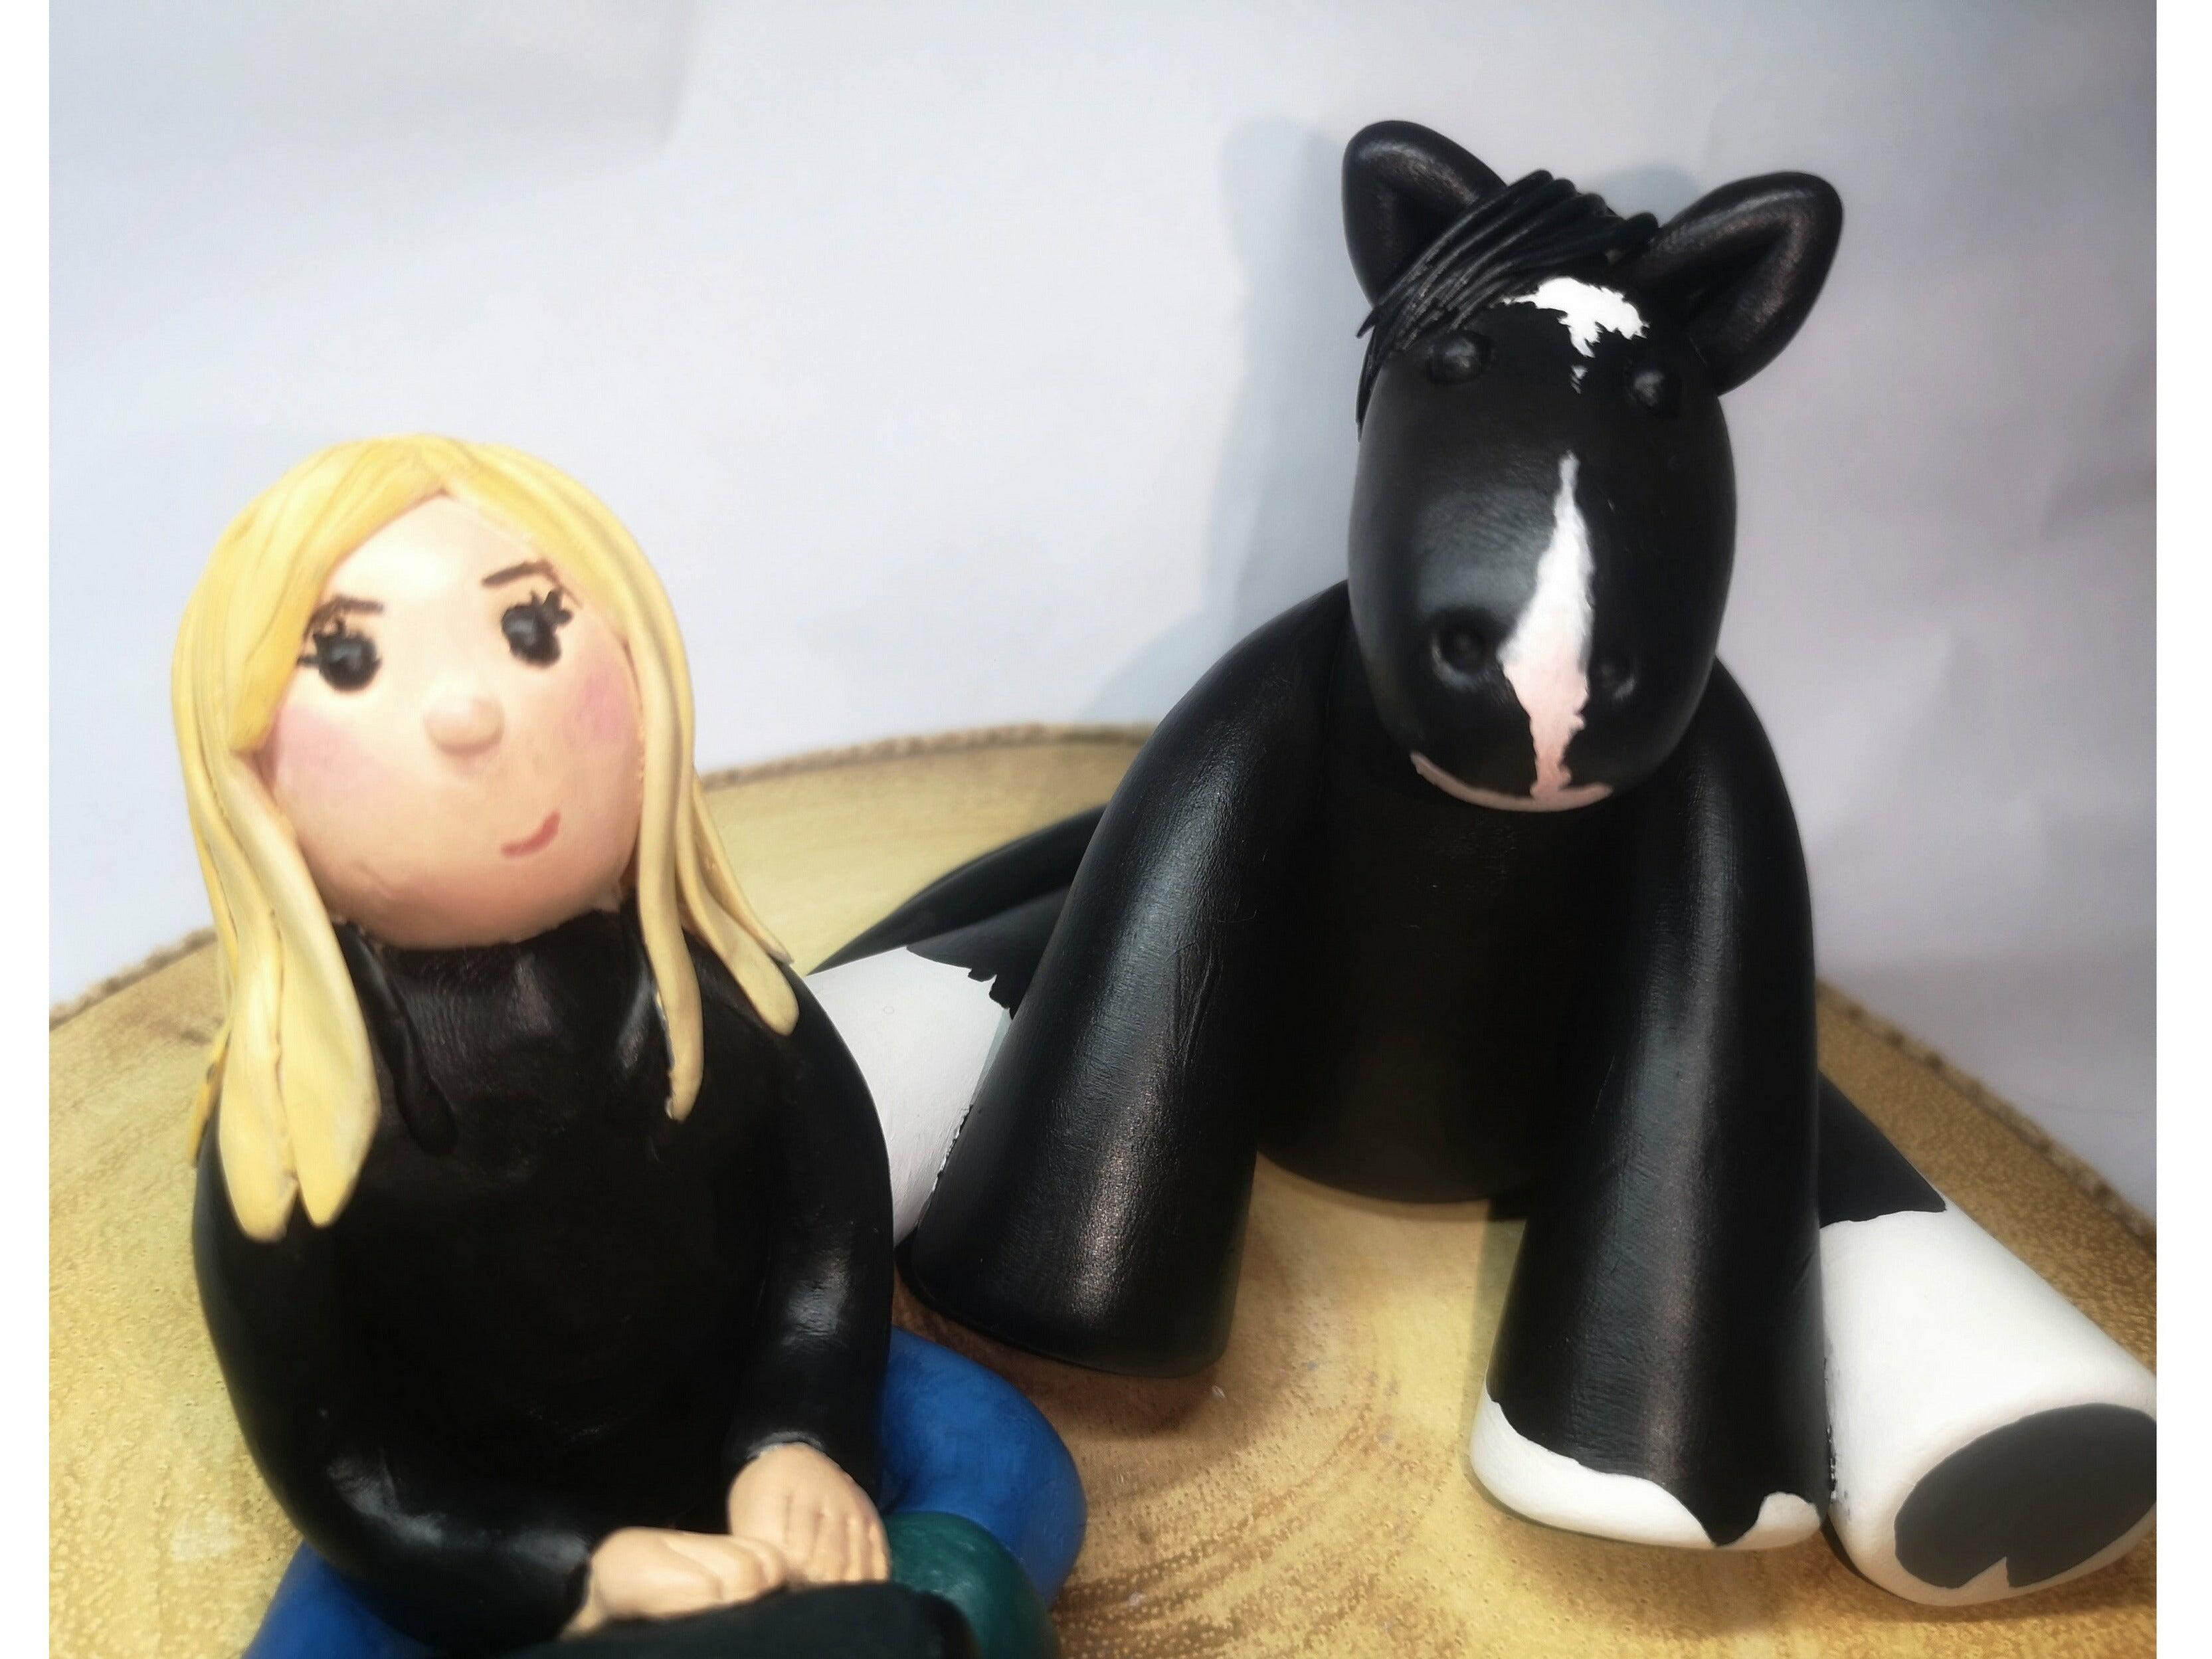 A close up of a clay model featuring a blonde girl and a black horse